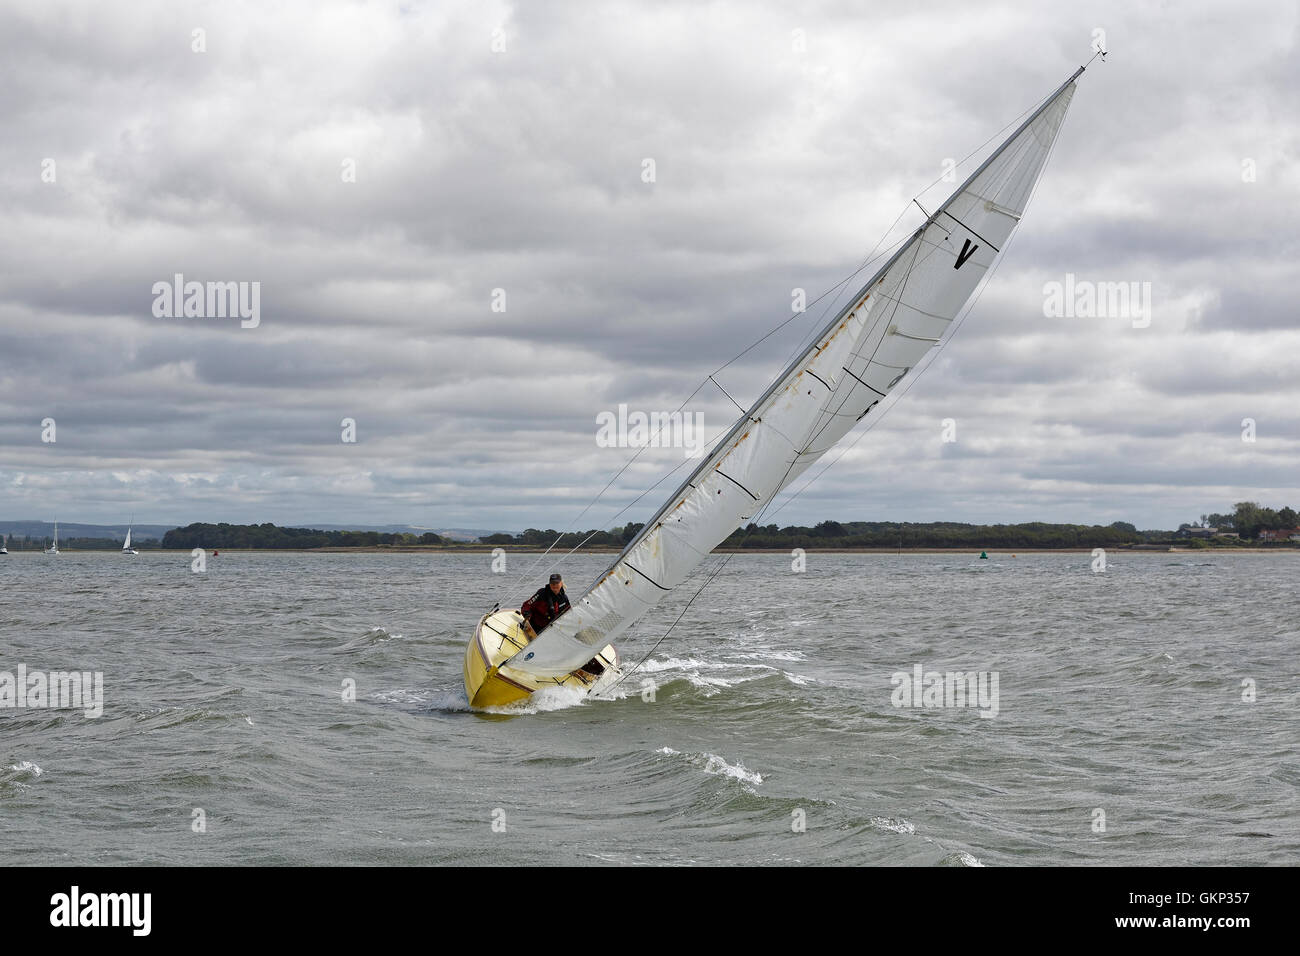 A sailing boat heels over, decks awash and running fast driven by strong winds. Stock Photo